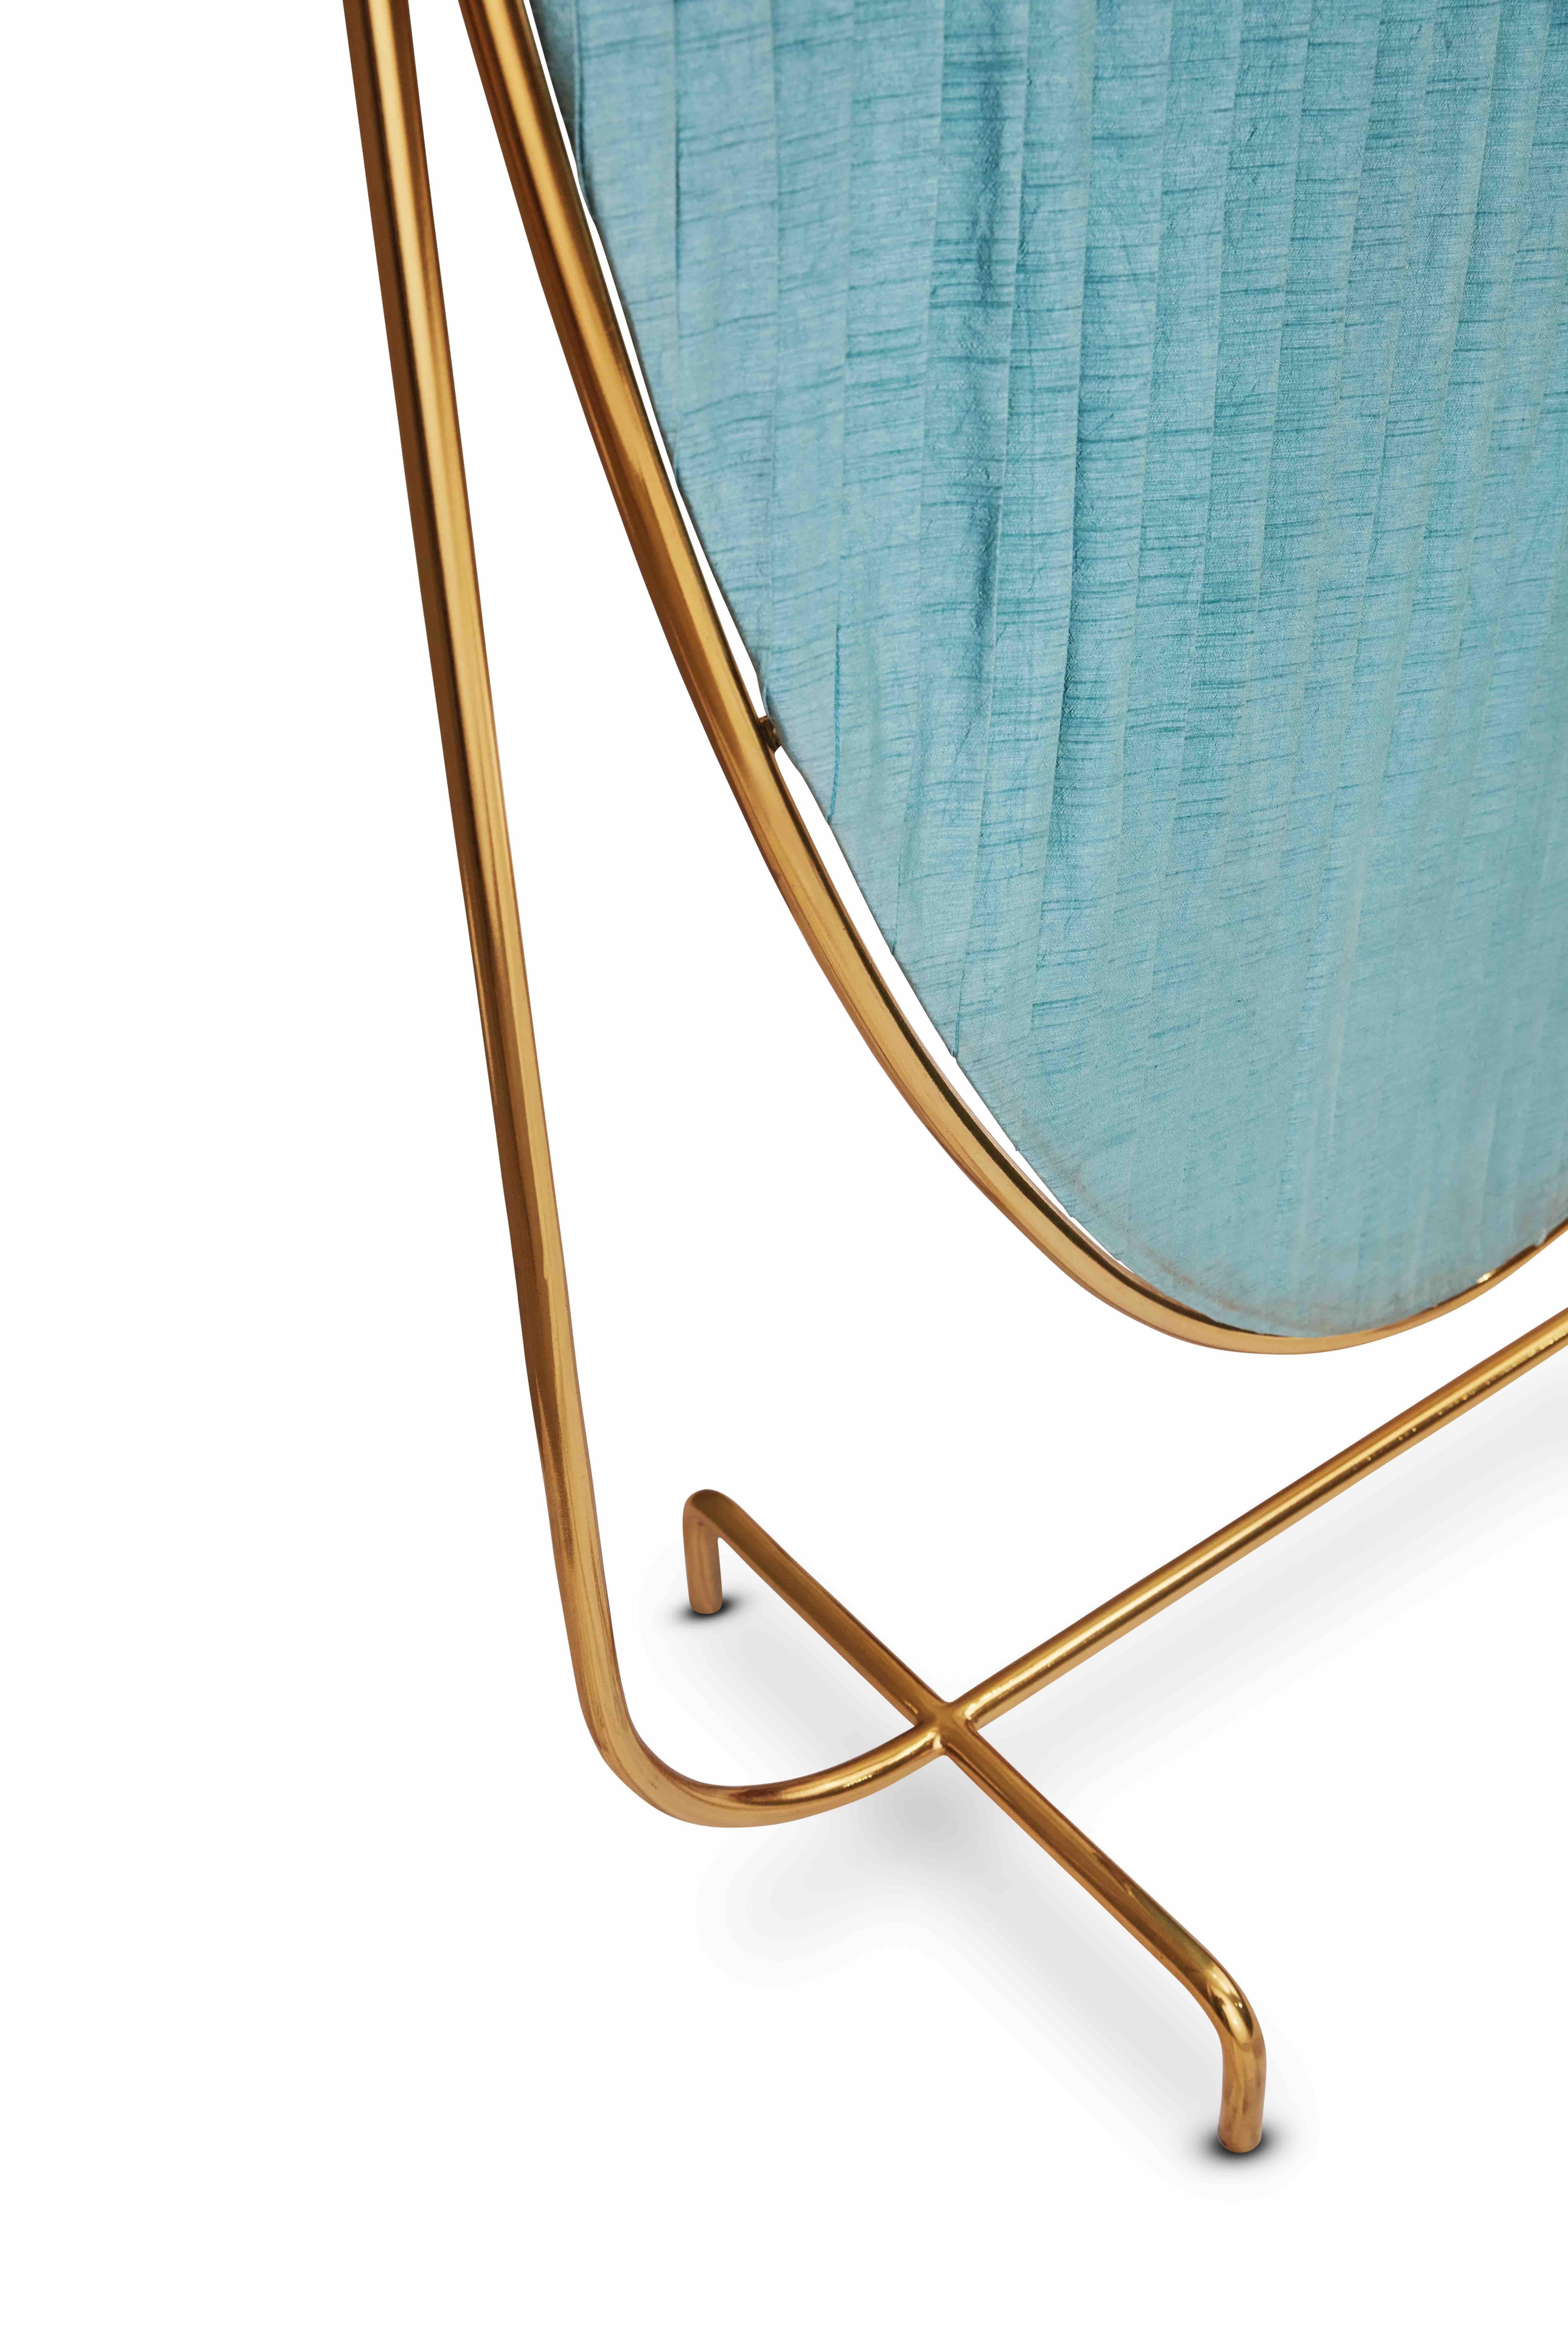 88 Secrets Screen in gold metal and blue silk by Nika Zupanc has a metal frame with meticulously pleated blue silk fabric. 

Nika Zupanc, a strikingly renowned Slovenian designer, never shies away from redefining the status quo of design, moving